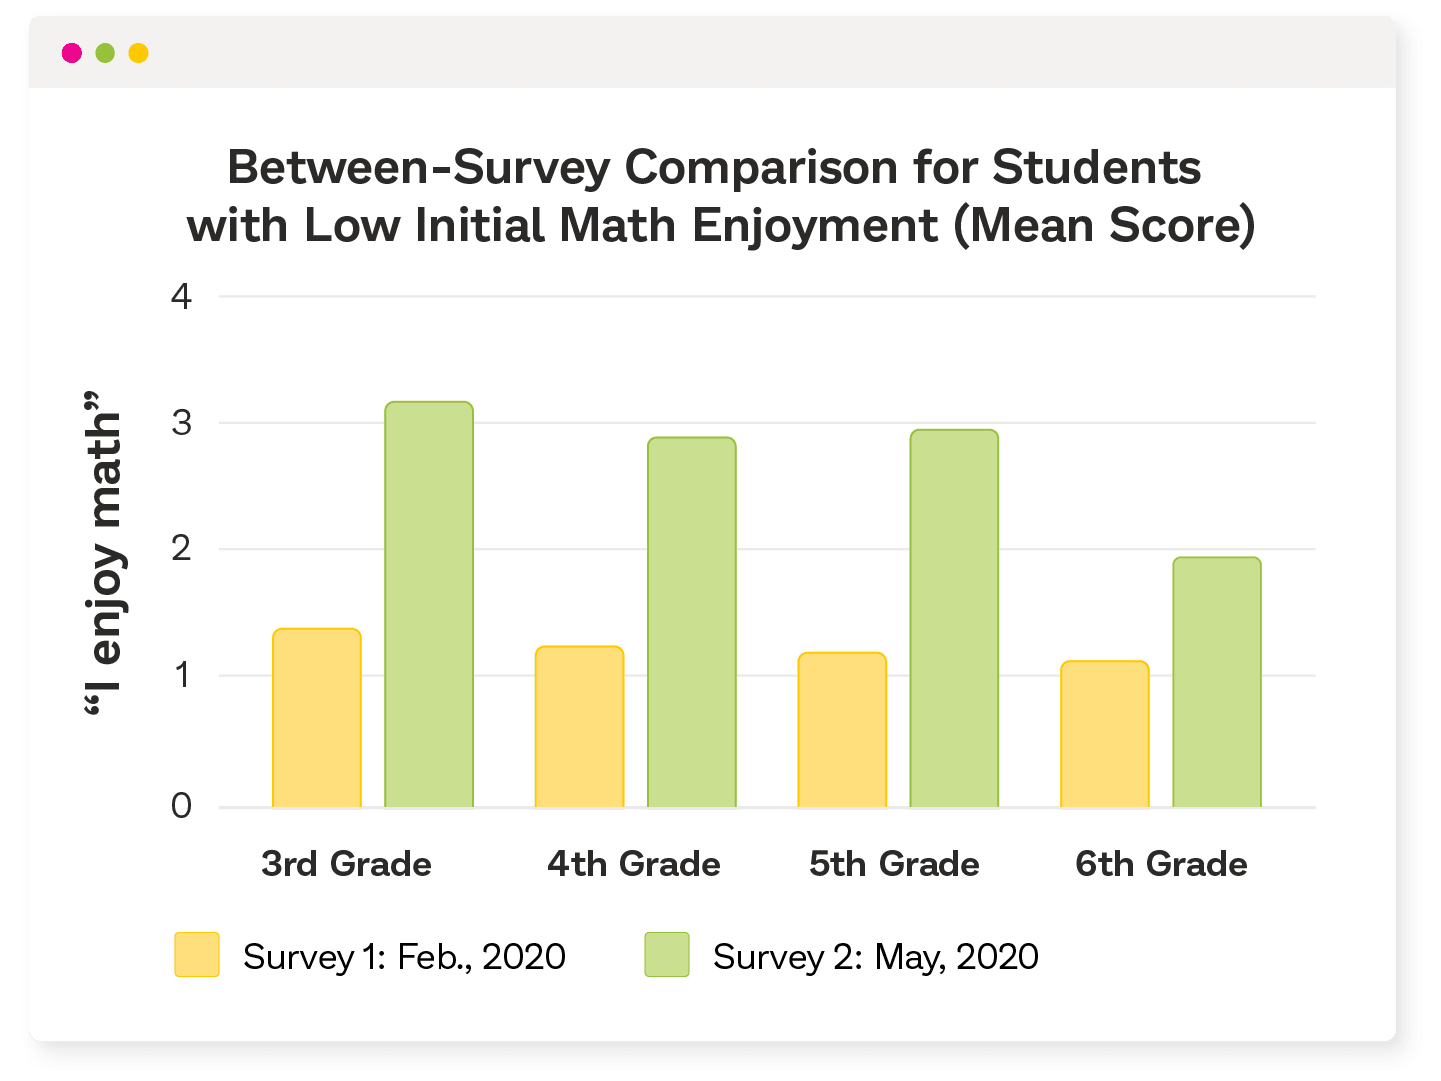 Between-Survey Comparison for Students with Low Initial Math Enjoyment (Mean Score)